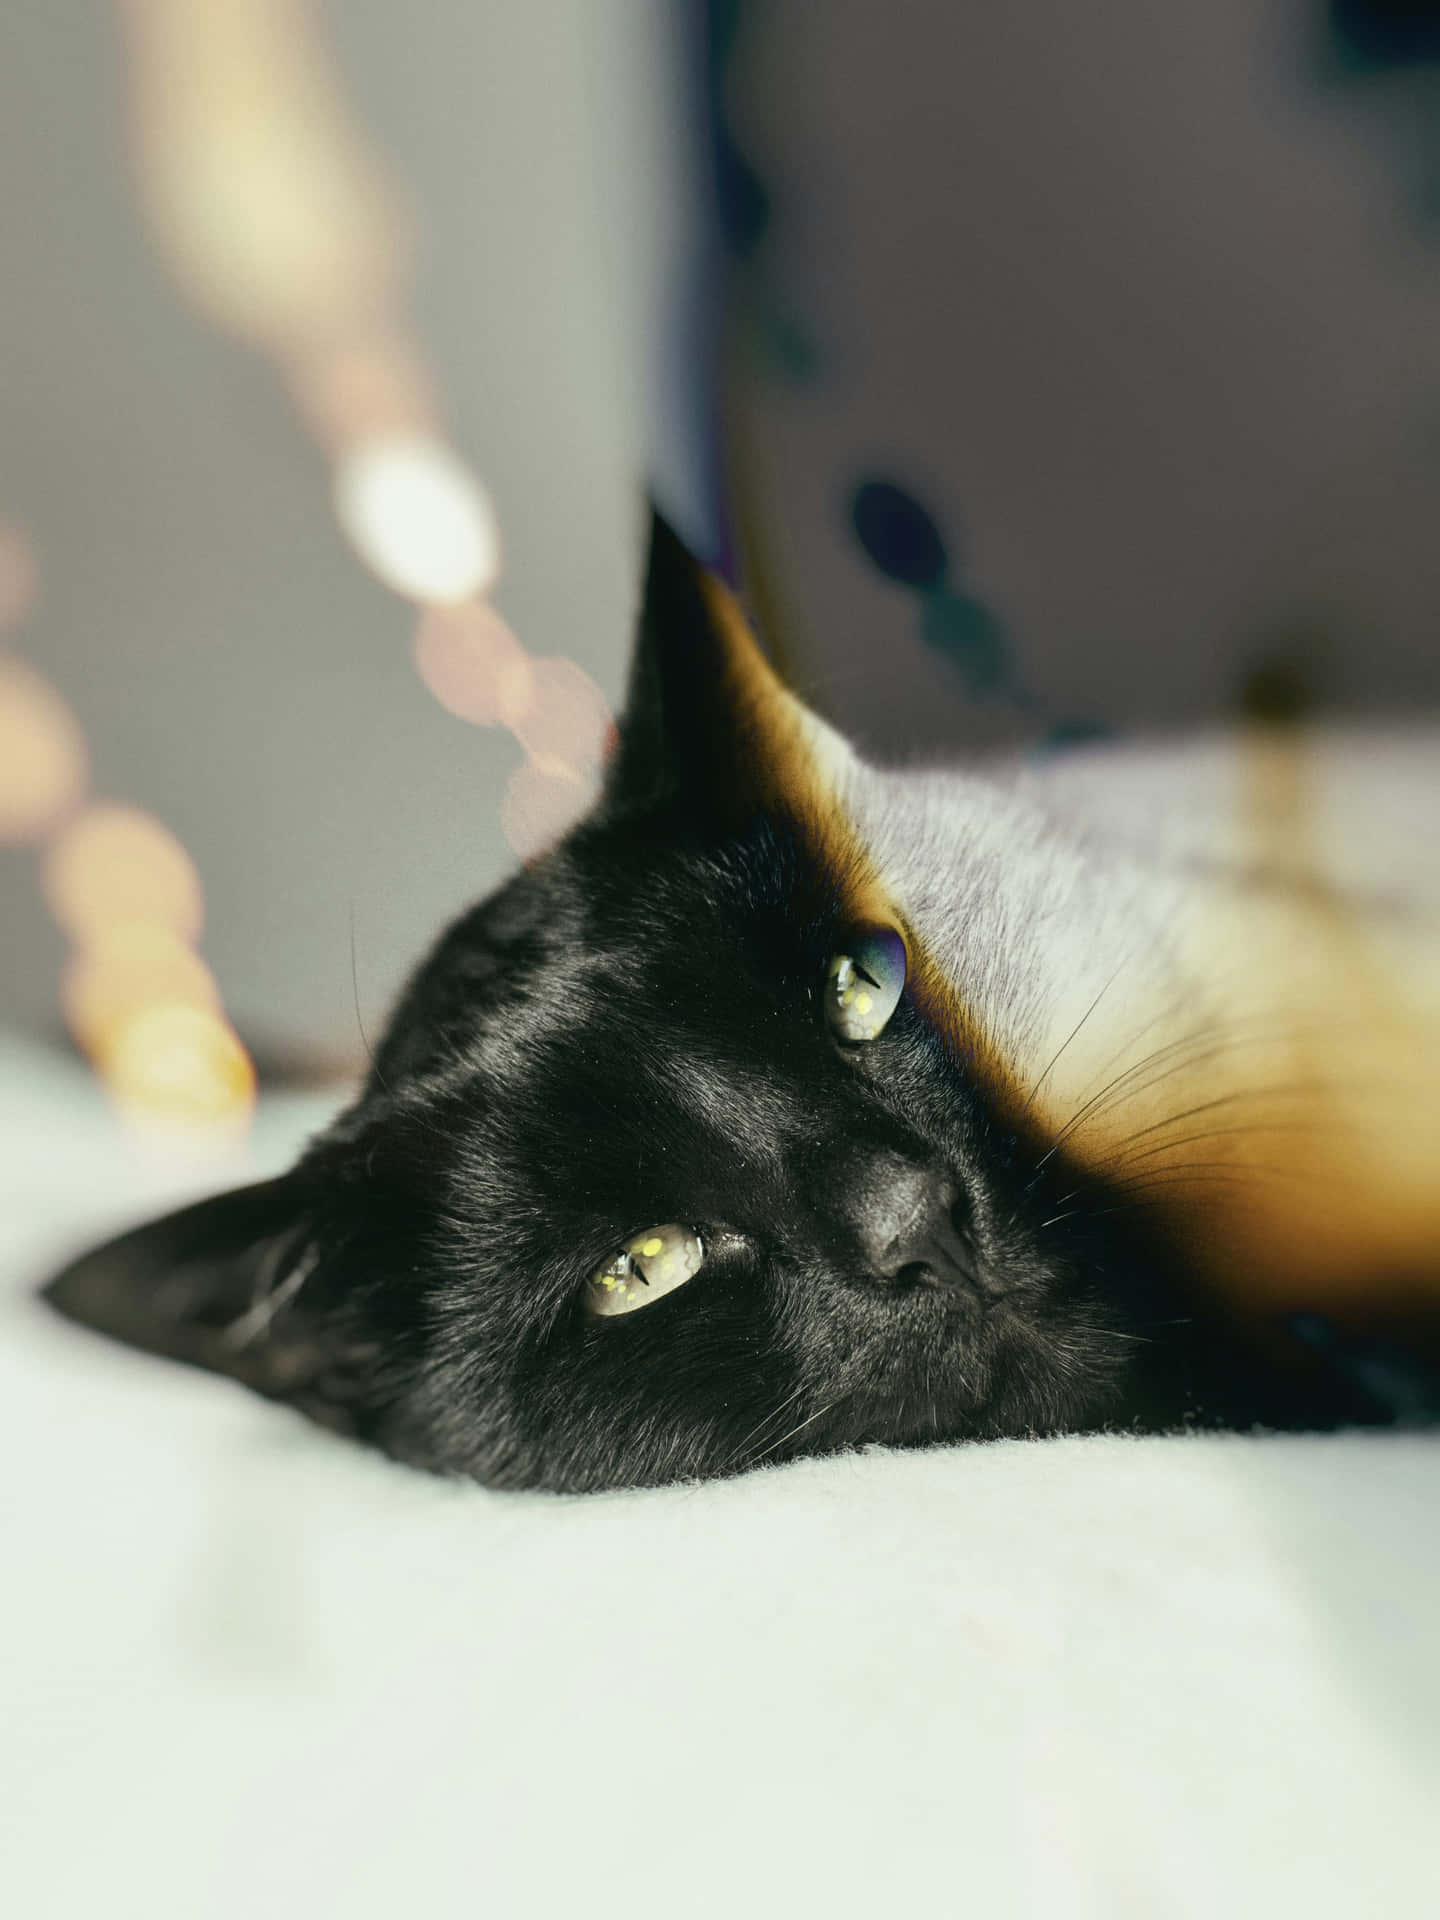 Relaxed Black Catwith Yellow Eyes Wallpaper